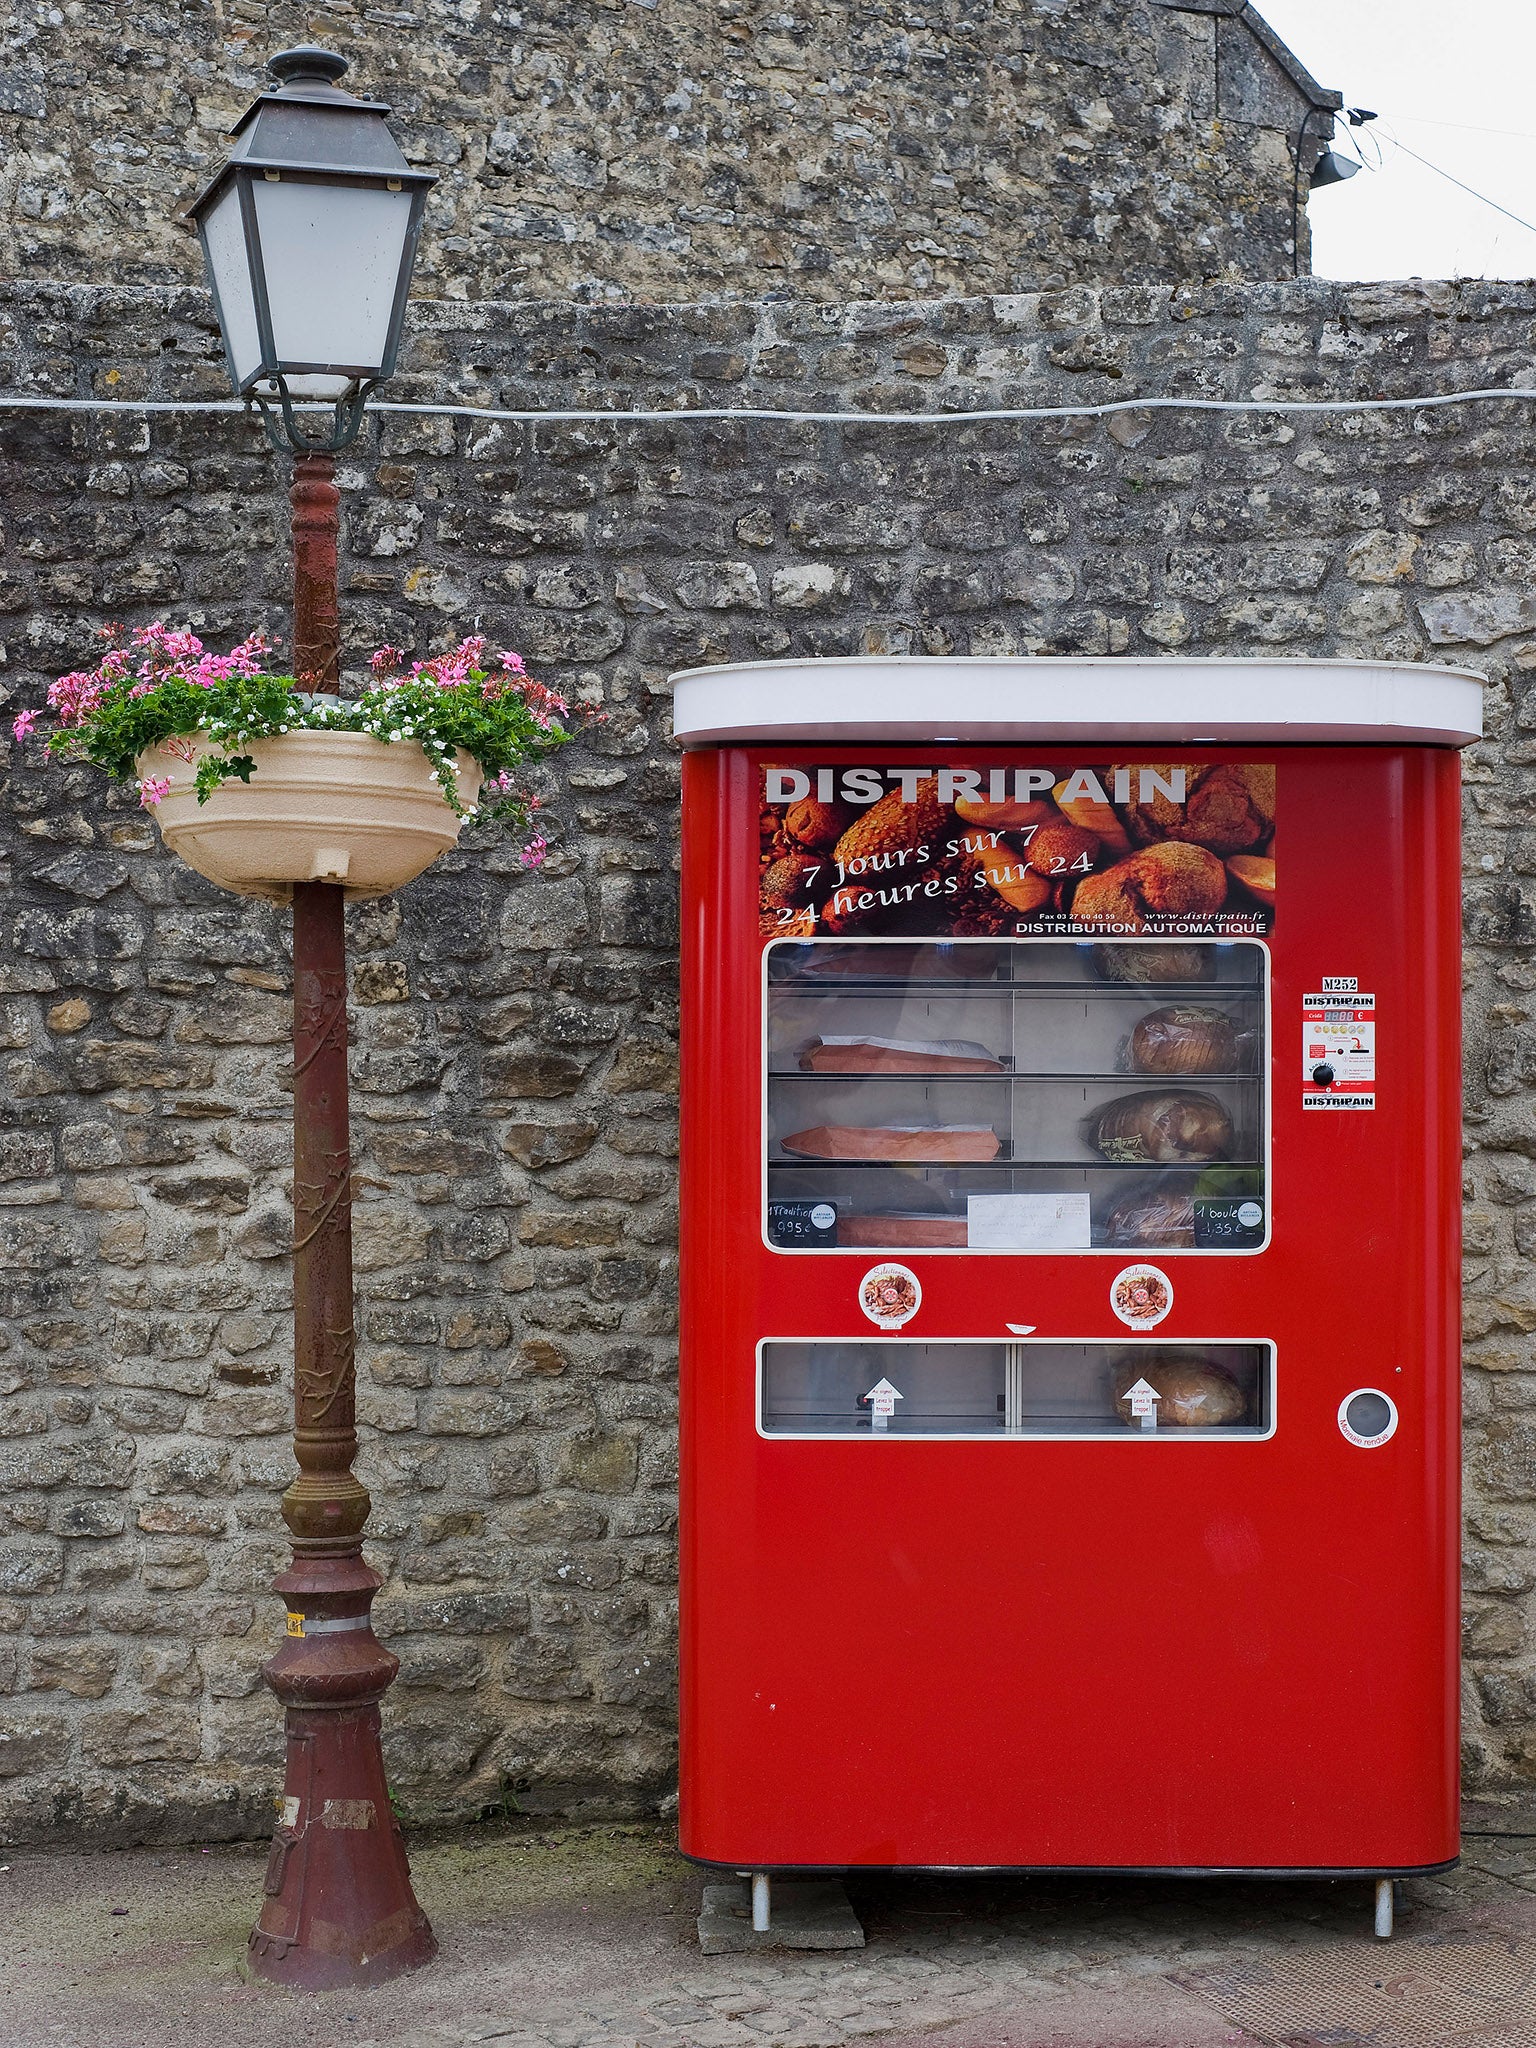 Vending machines have popped up in towns where bakeries have closed